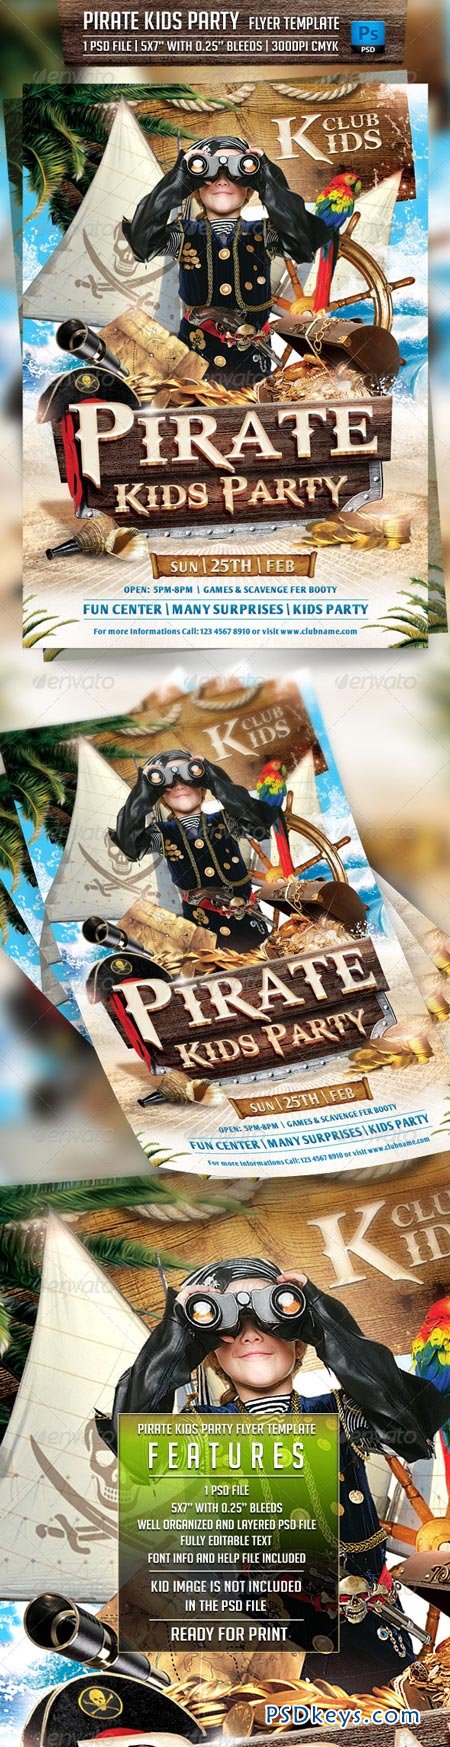 Pirate Kids Party Flyer Template 6913284